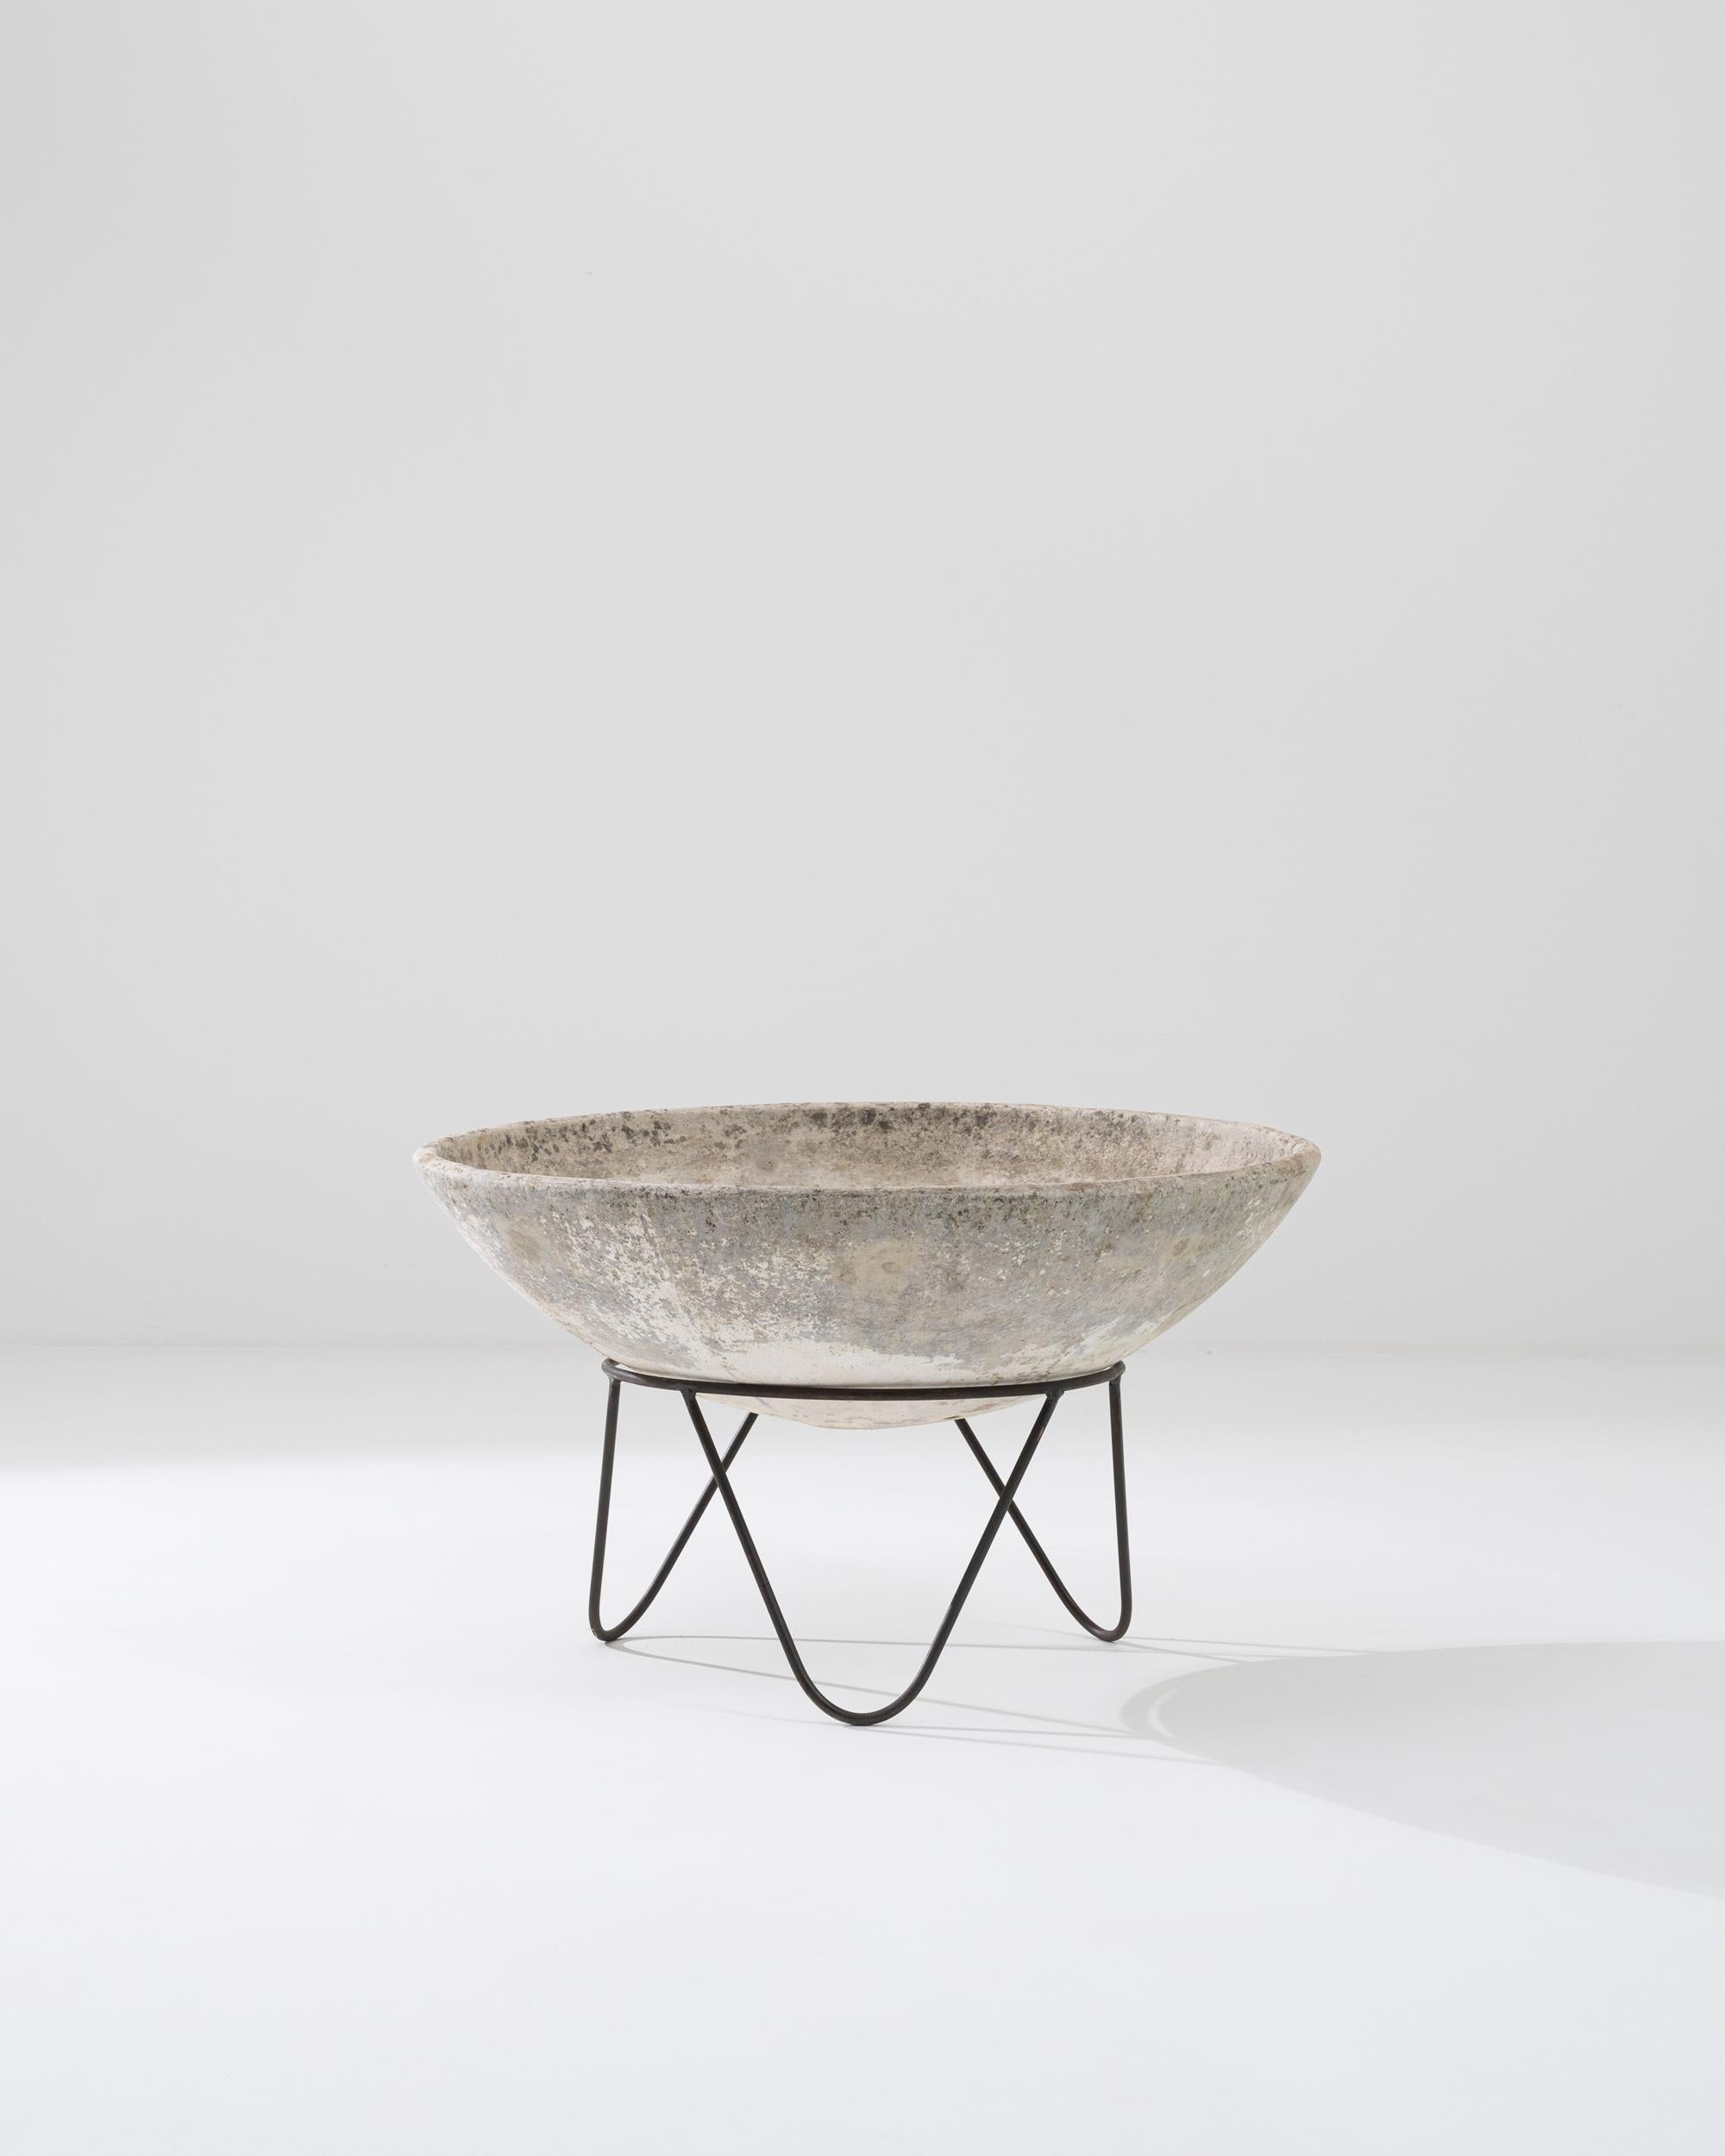 A concrete planter on a metal stand from France, circa 1960. This piece consists of a deep concrete bowl, which has developed a rich patina, over top a tripod of welded hairpin legs. Waiting to be filled with numerous possibilities, this unique